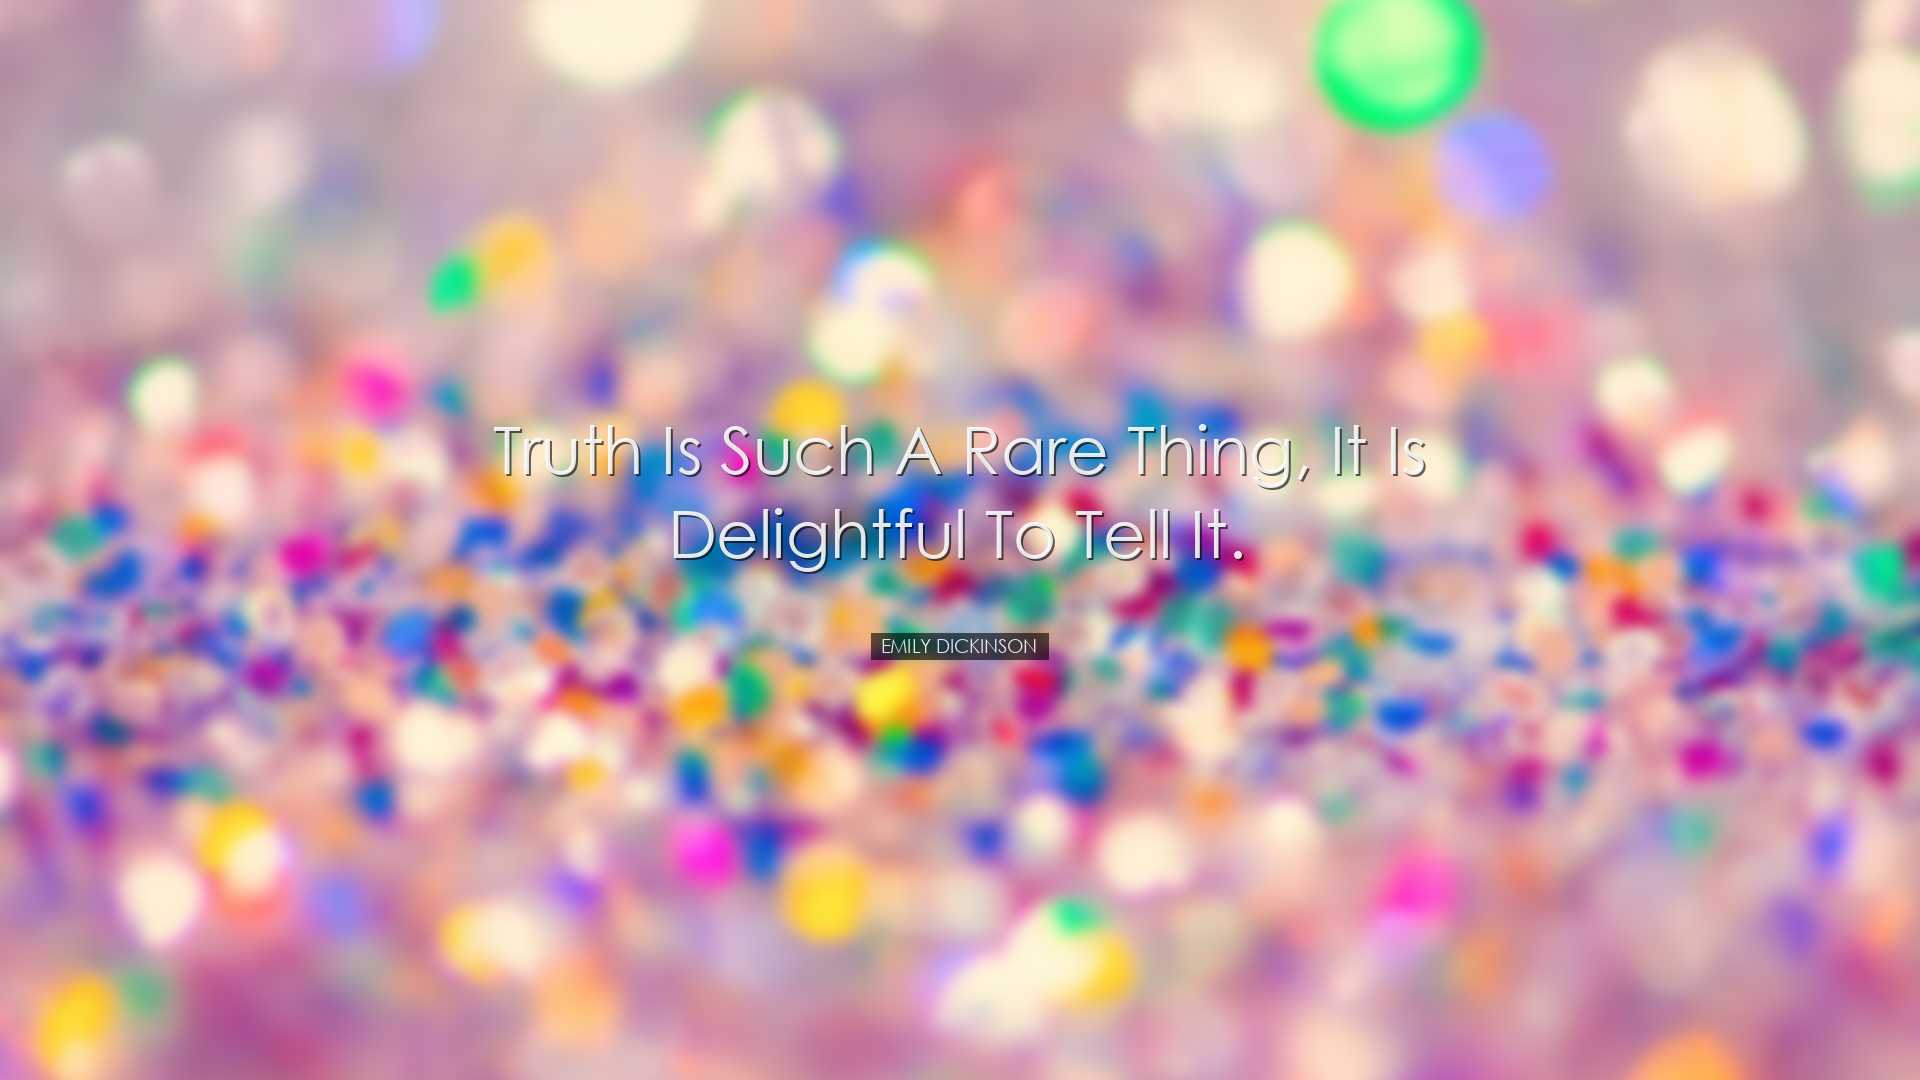 Truth is such a rare thing, it is delightful to tell it. - Emily D